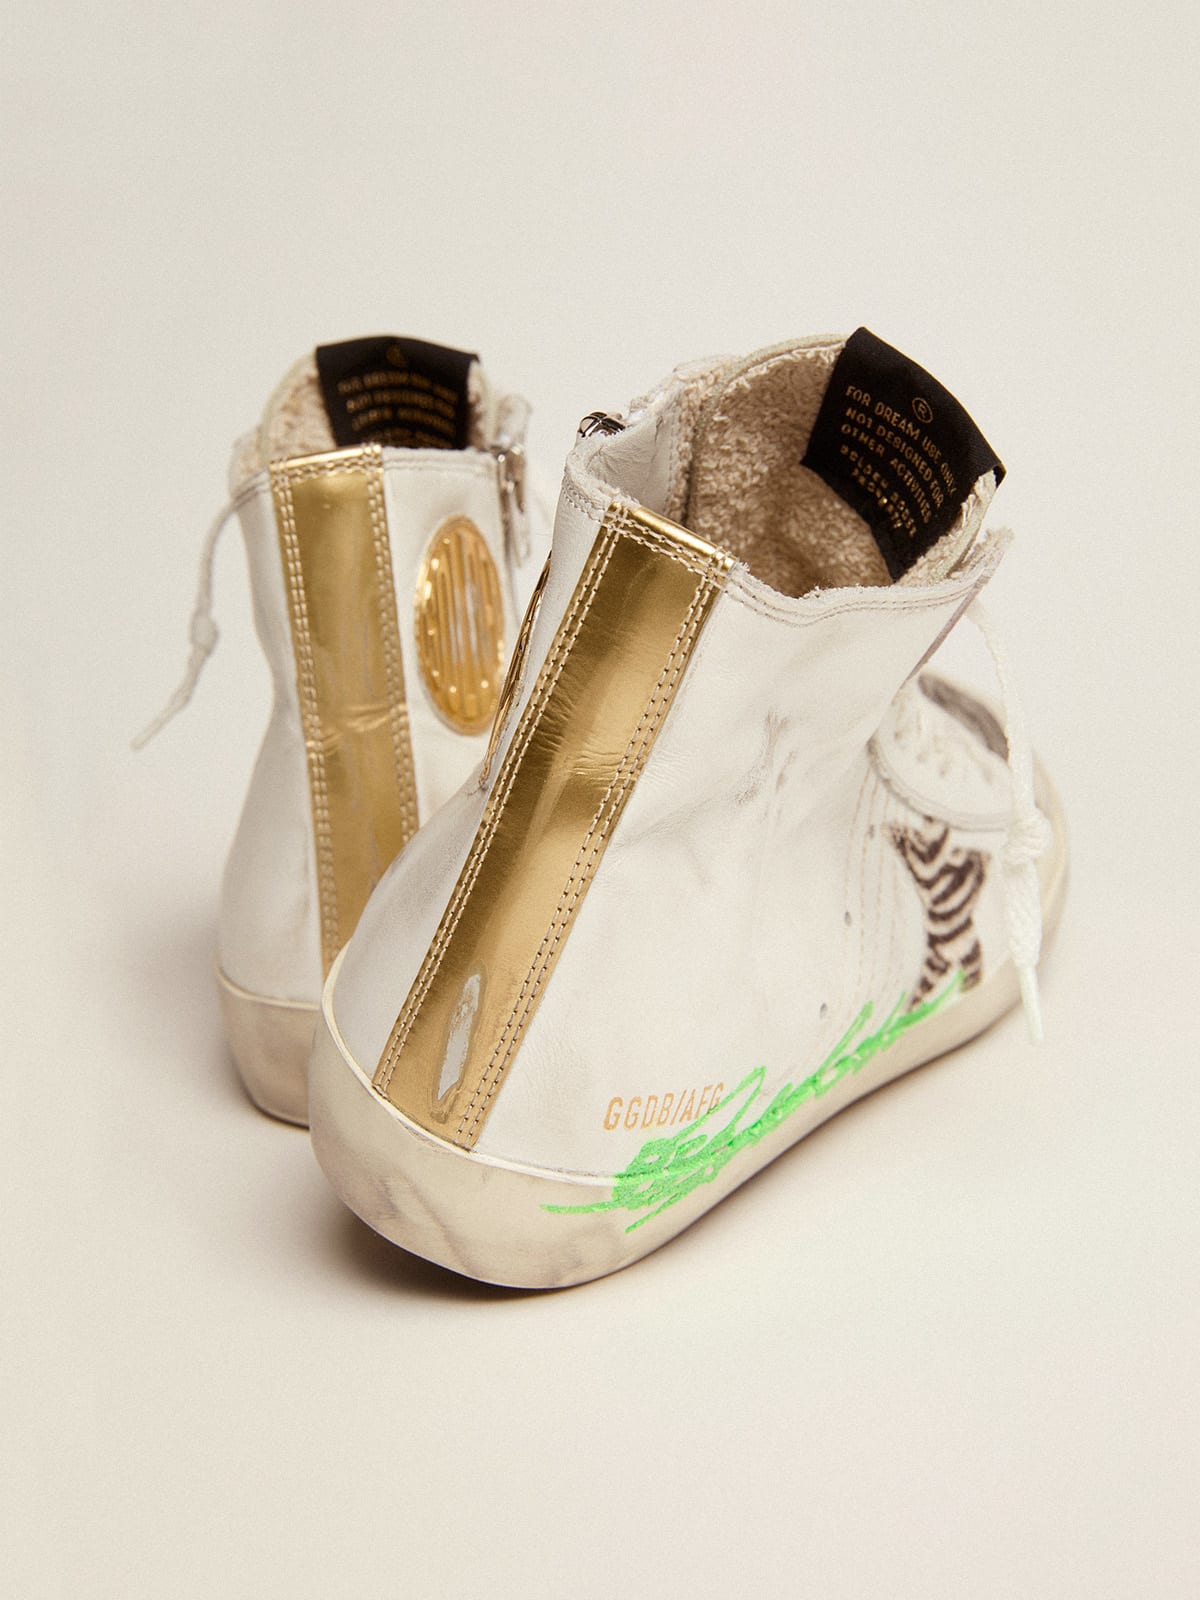 Golden Goose - Francy Penstar LTD sneakers with zebra-print pony skin star and toe and gold leather heel tab in 